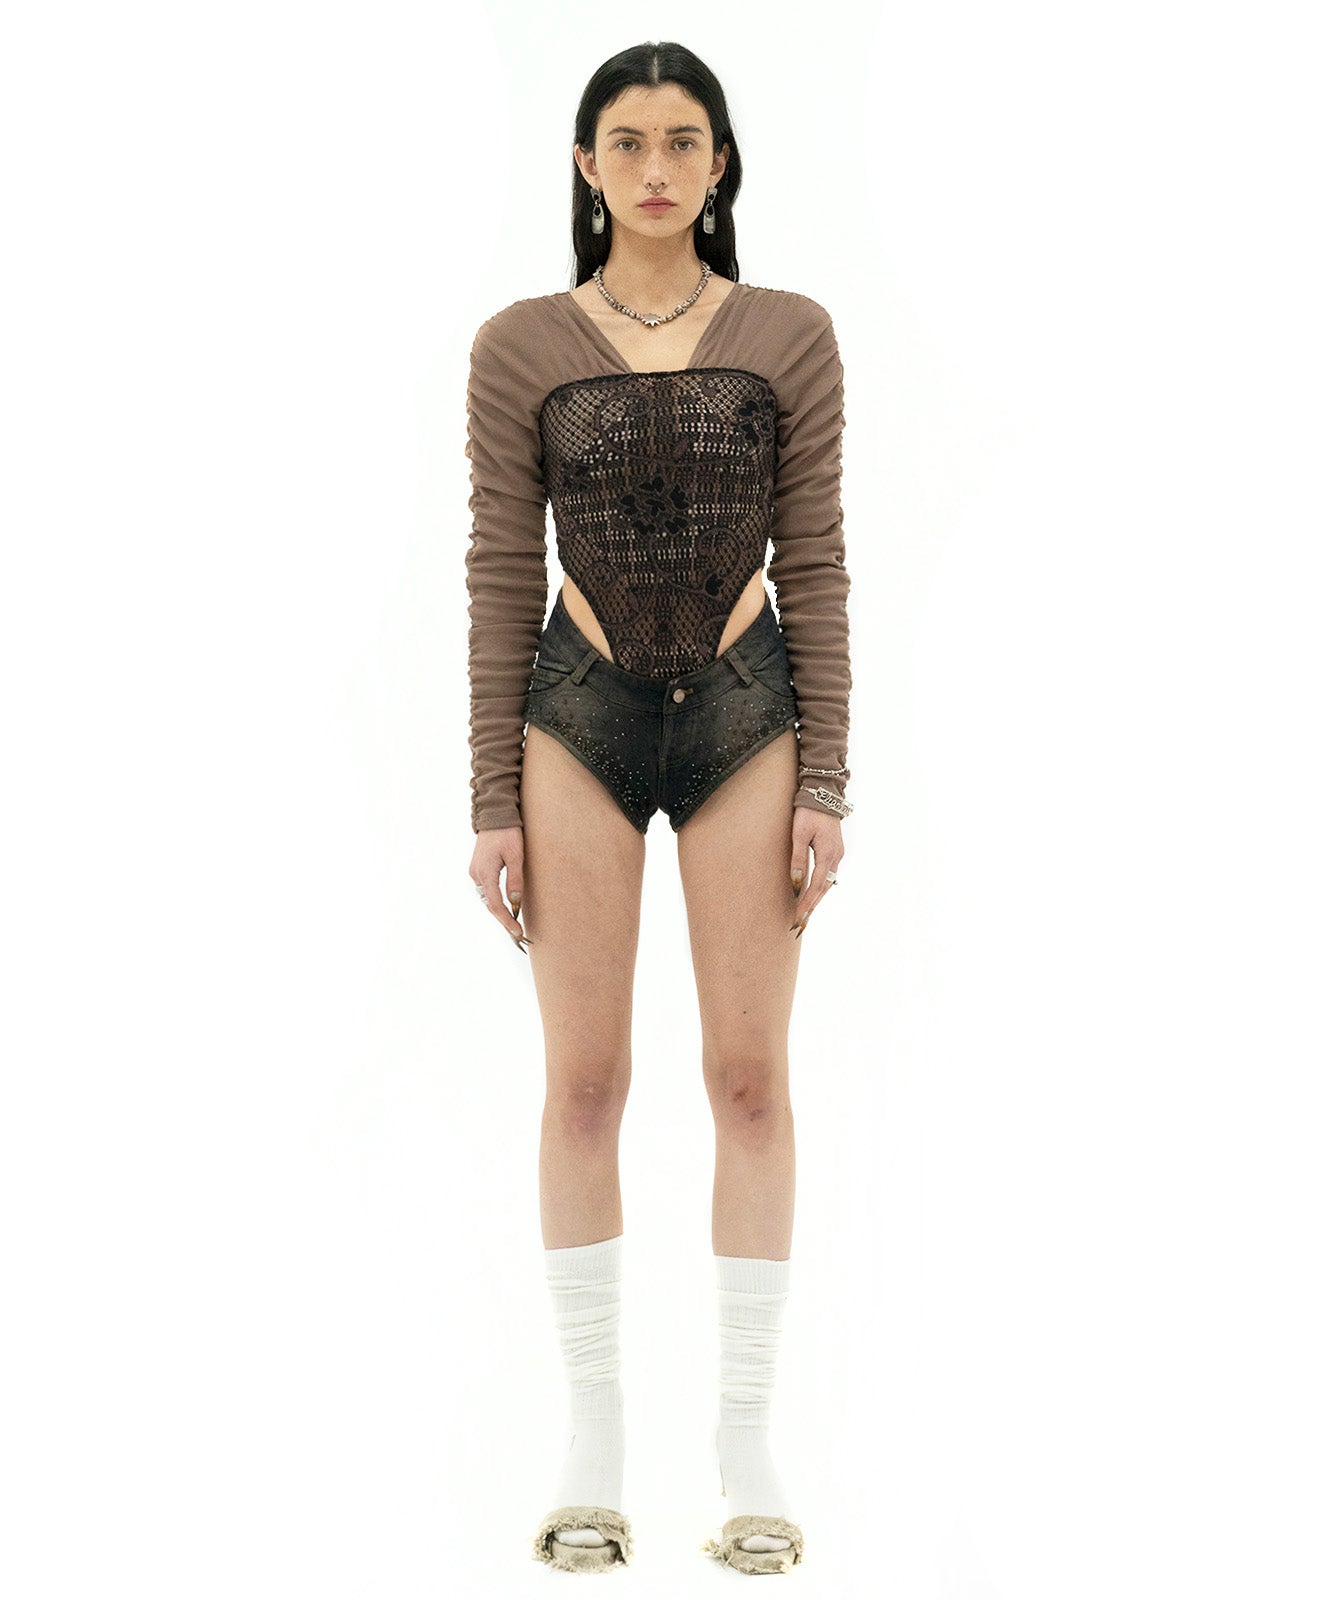 Rose Knitted Bodysuit Top